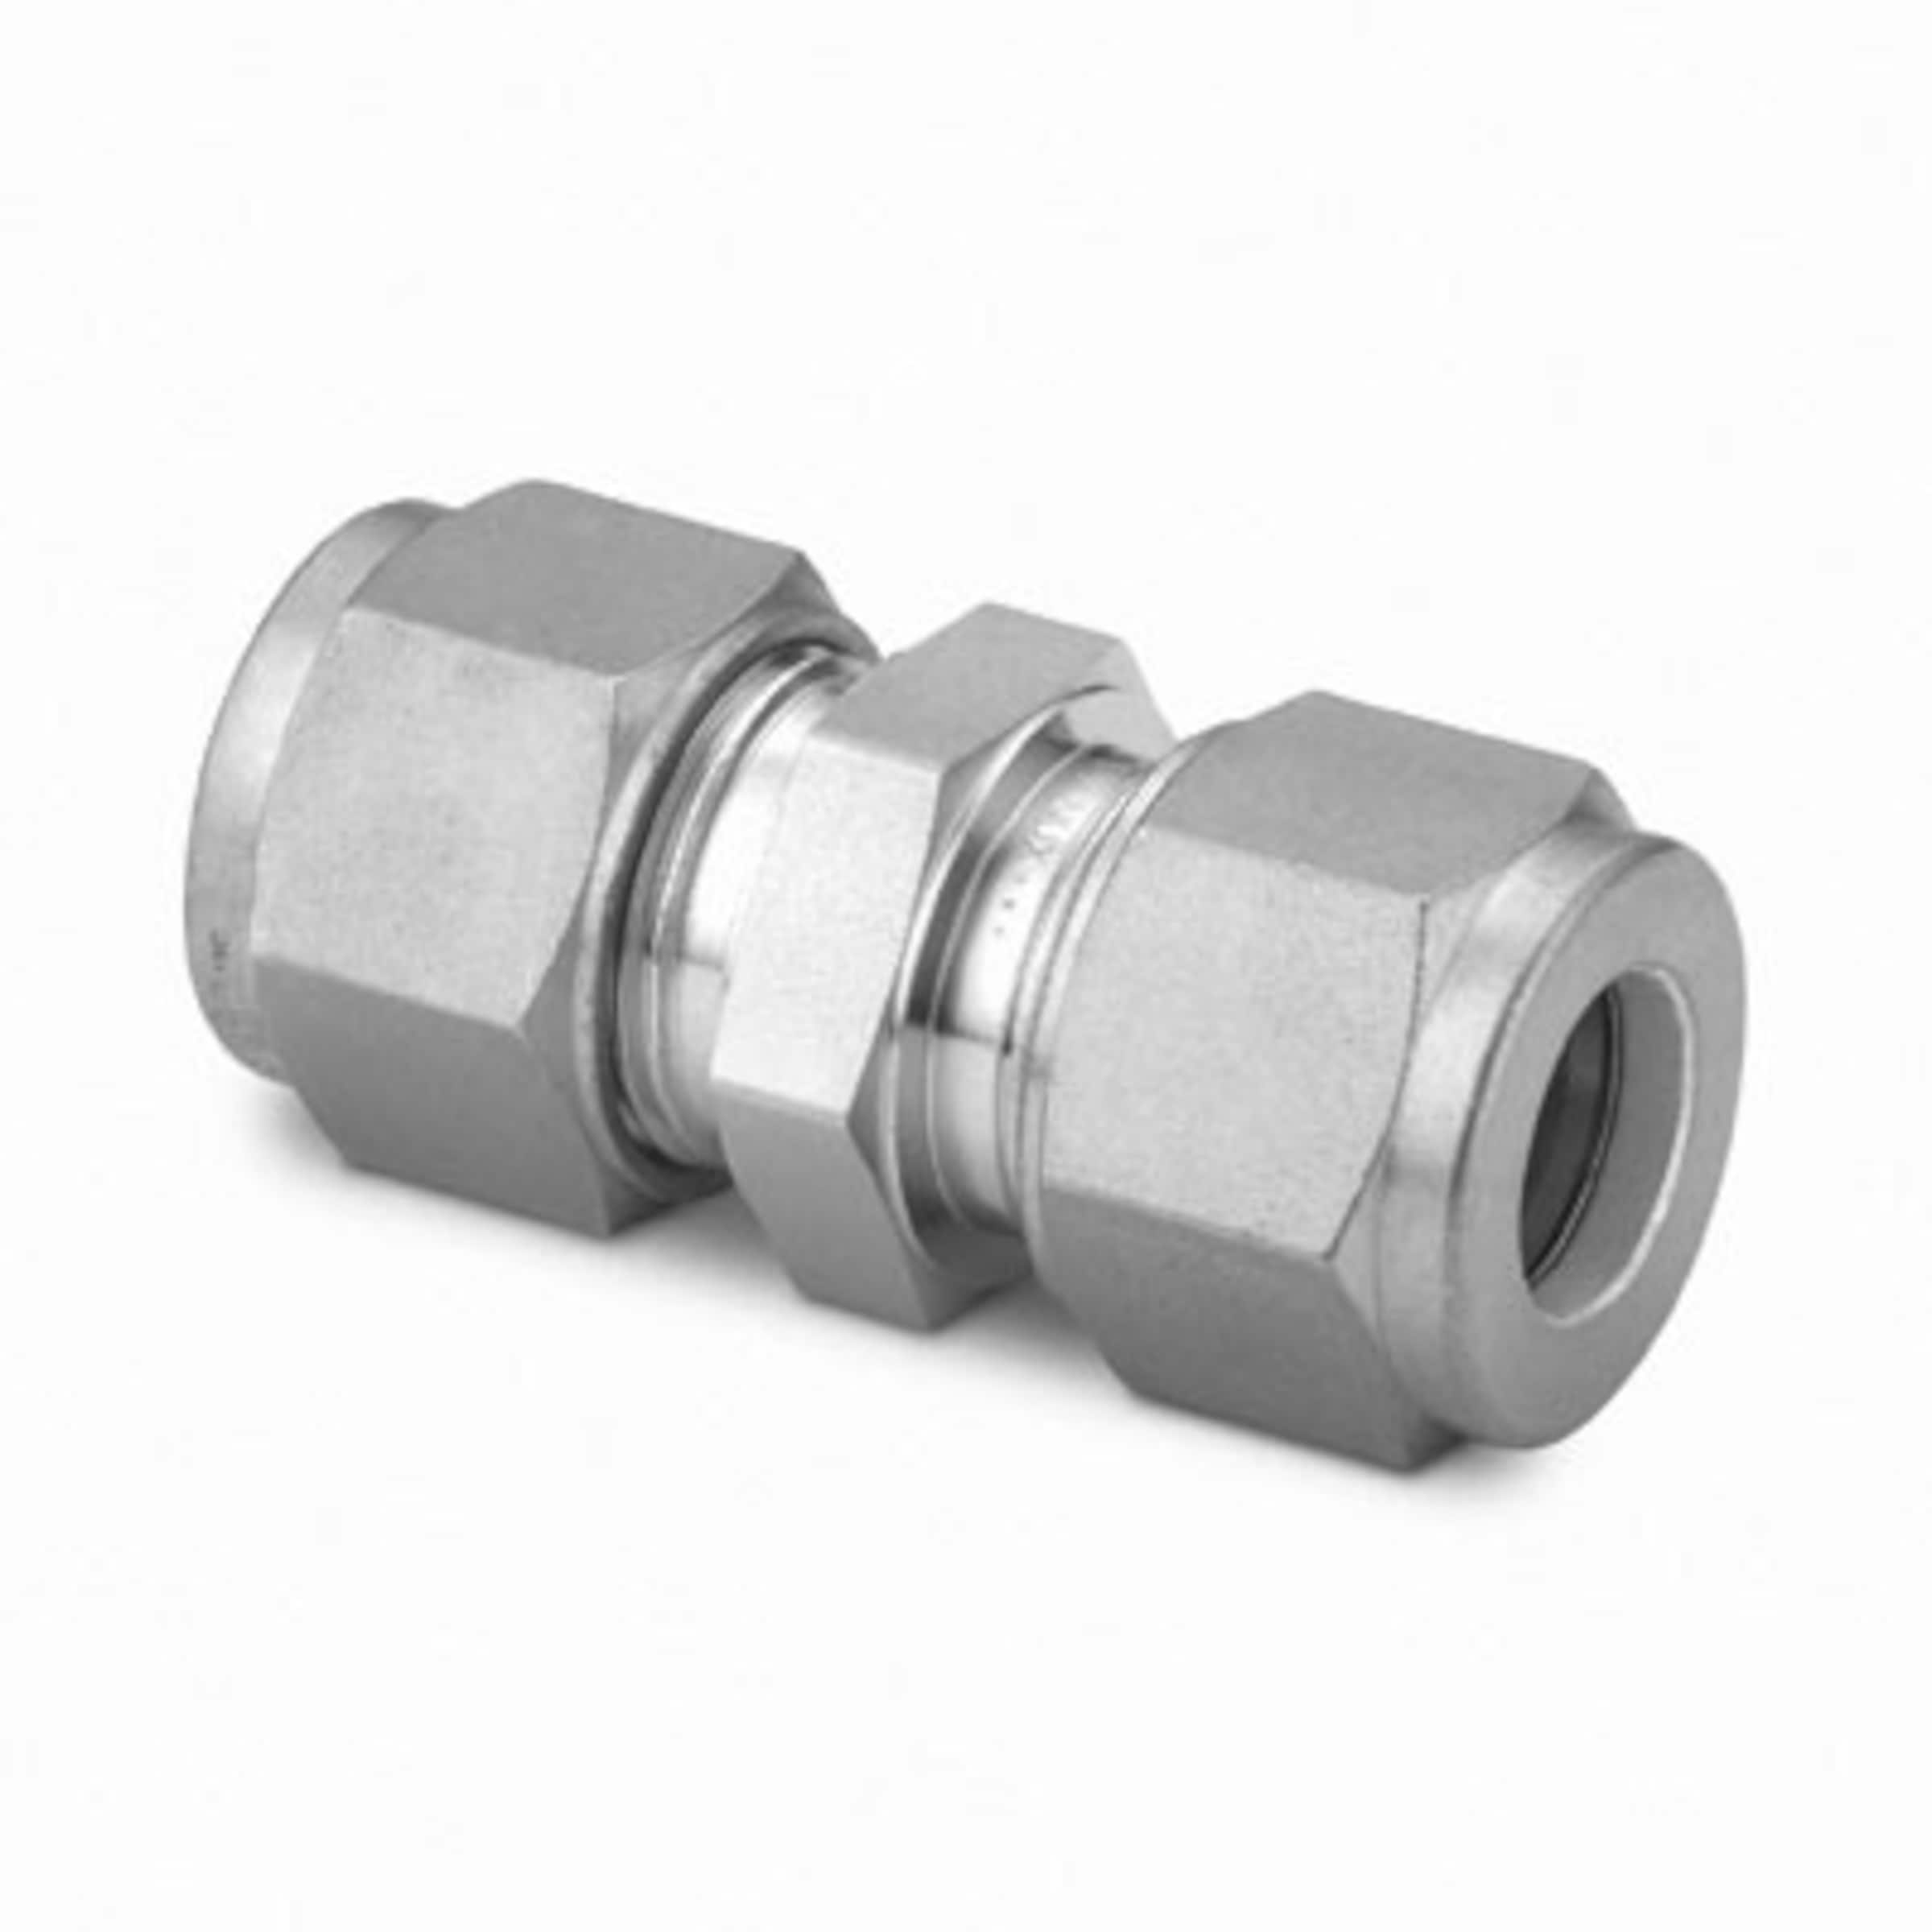 Stainless Steel Swagelok Tube Fitting, Union, 16 mm Tube OD, Unions, Tube  Fittings and Adapters, Fittings, All Products